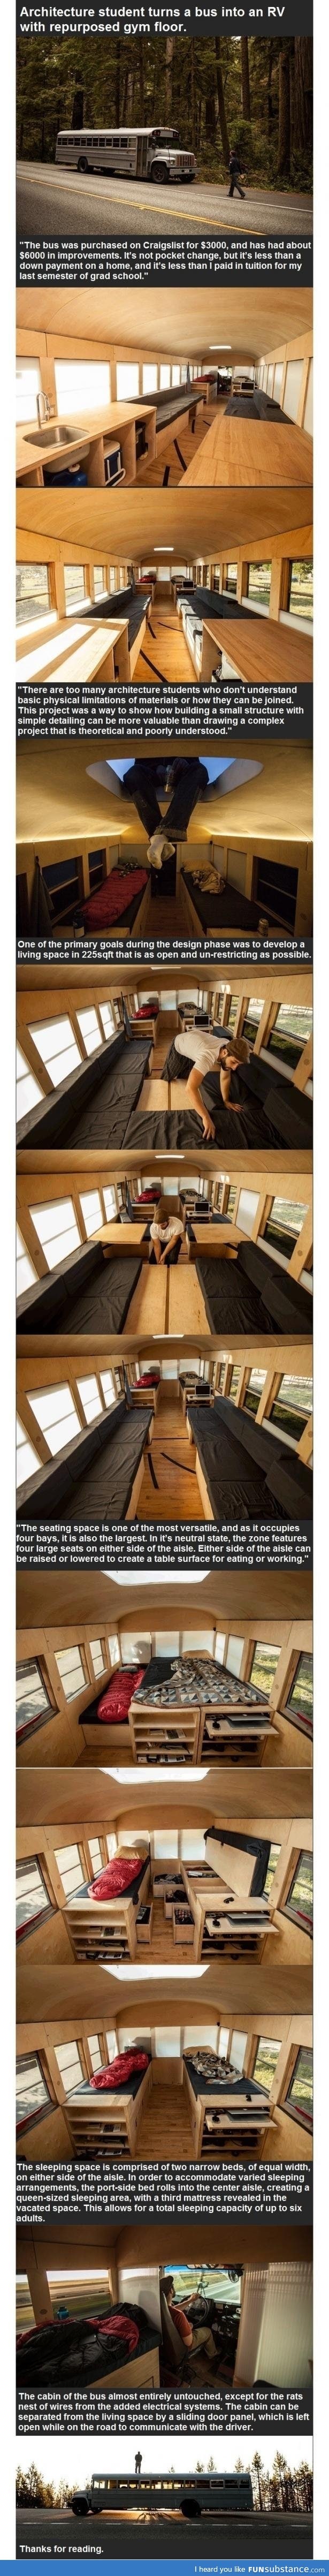 Bus converted into an RV